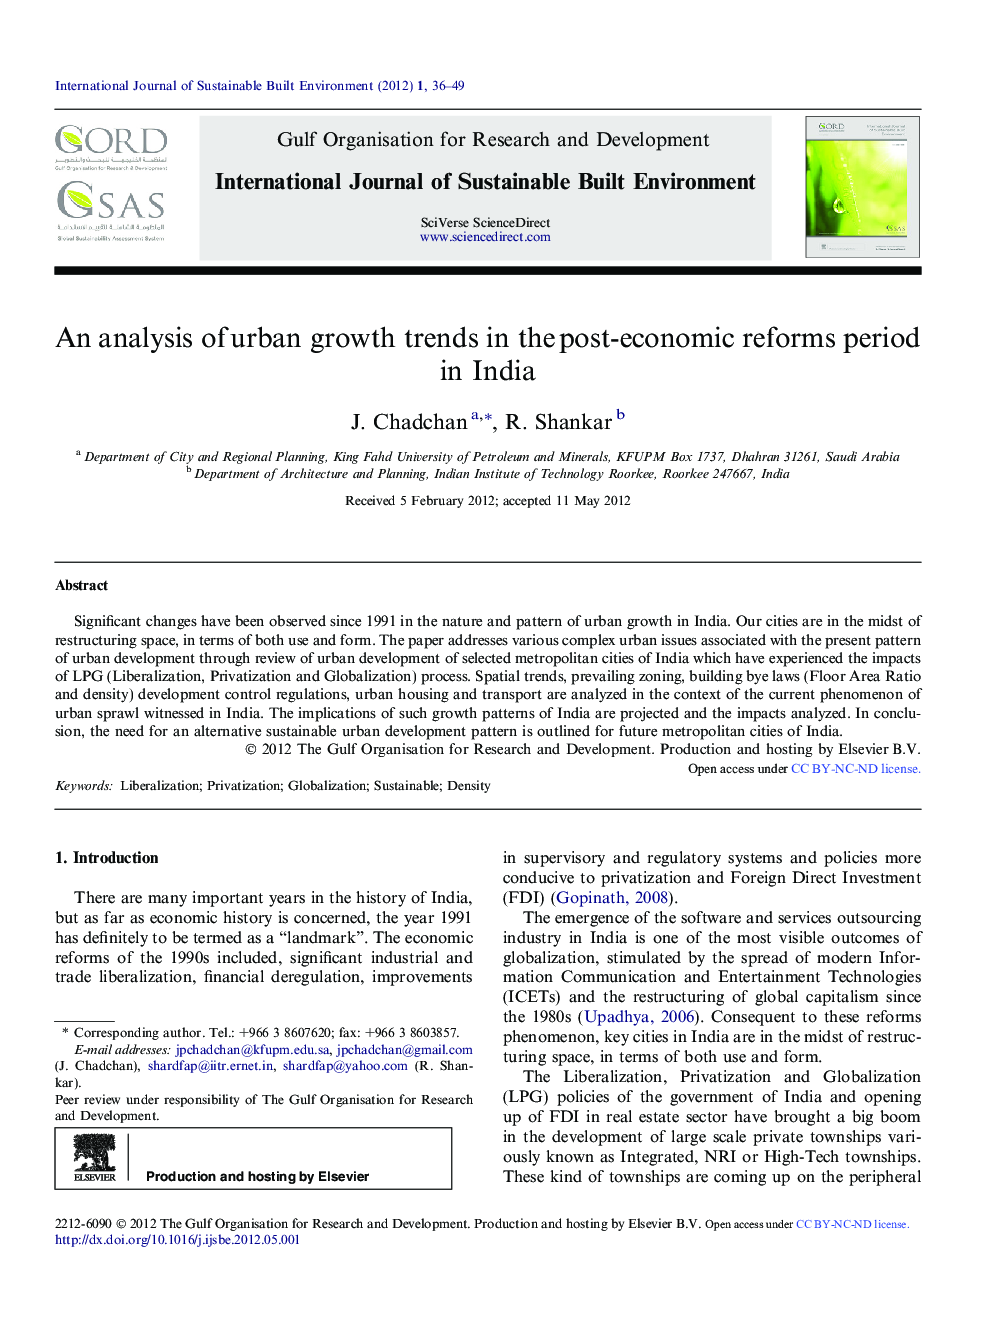 An analysis of urban growth trends in the post-economic reforms period in India 